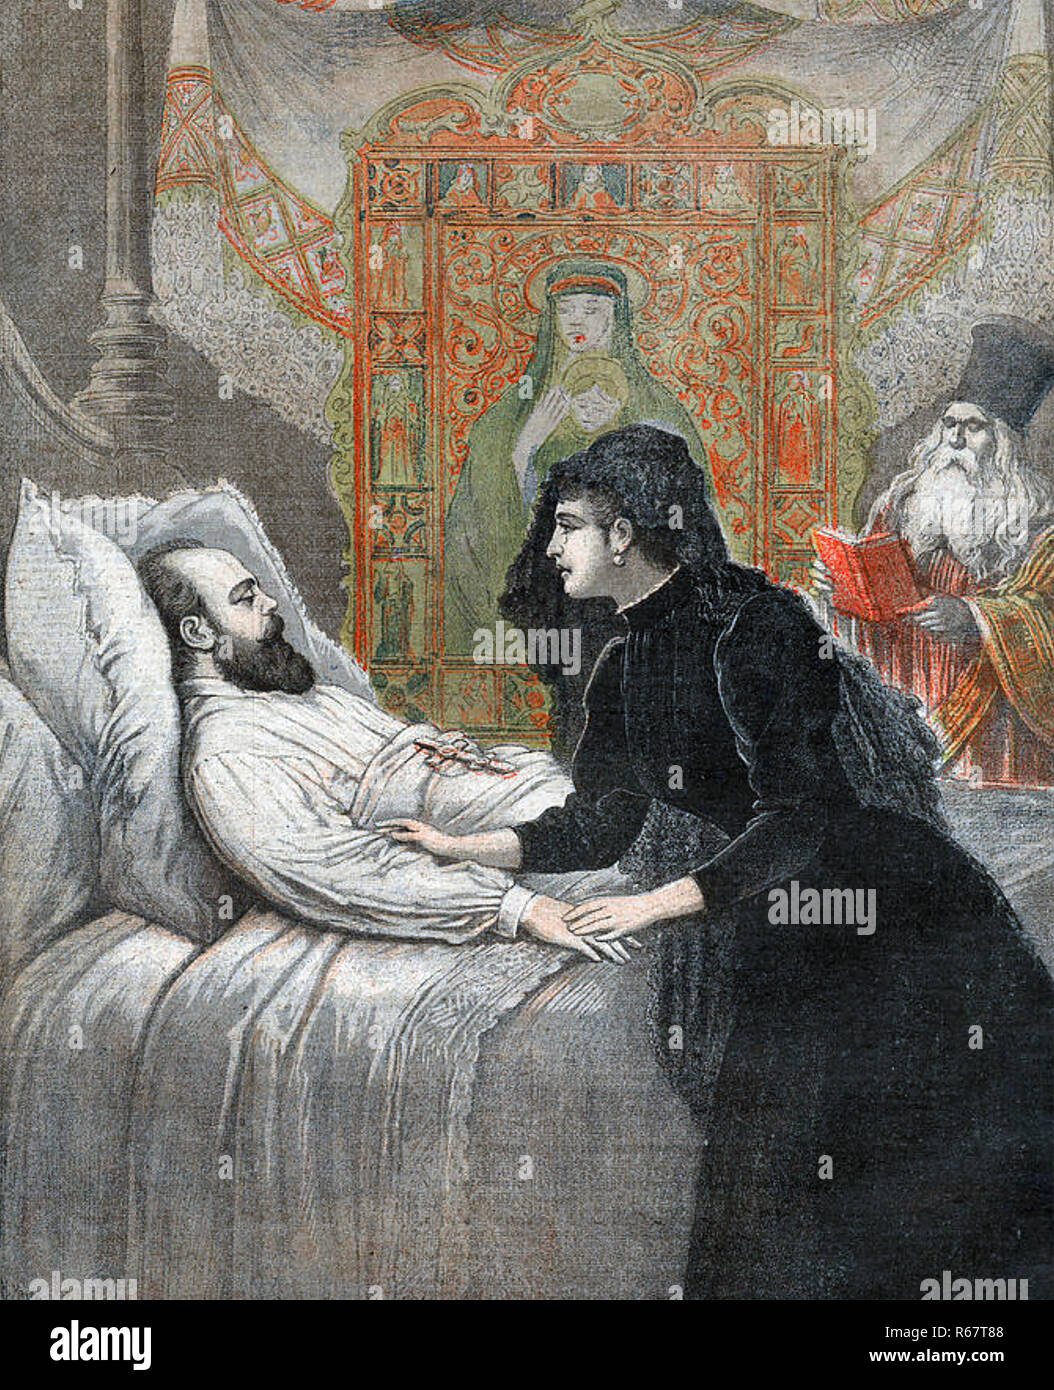 ALEXANDER III OF RUSSIA (1845-1894) on his deathbed with his wife Dagmar of Denmark Stock Photo